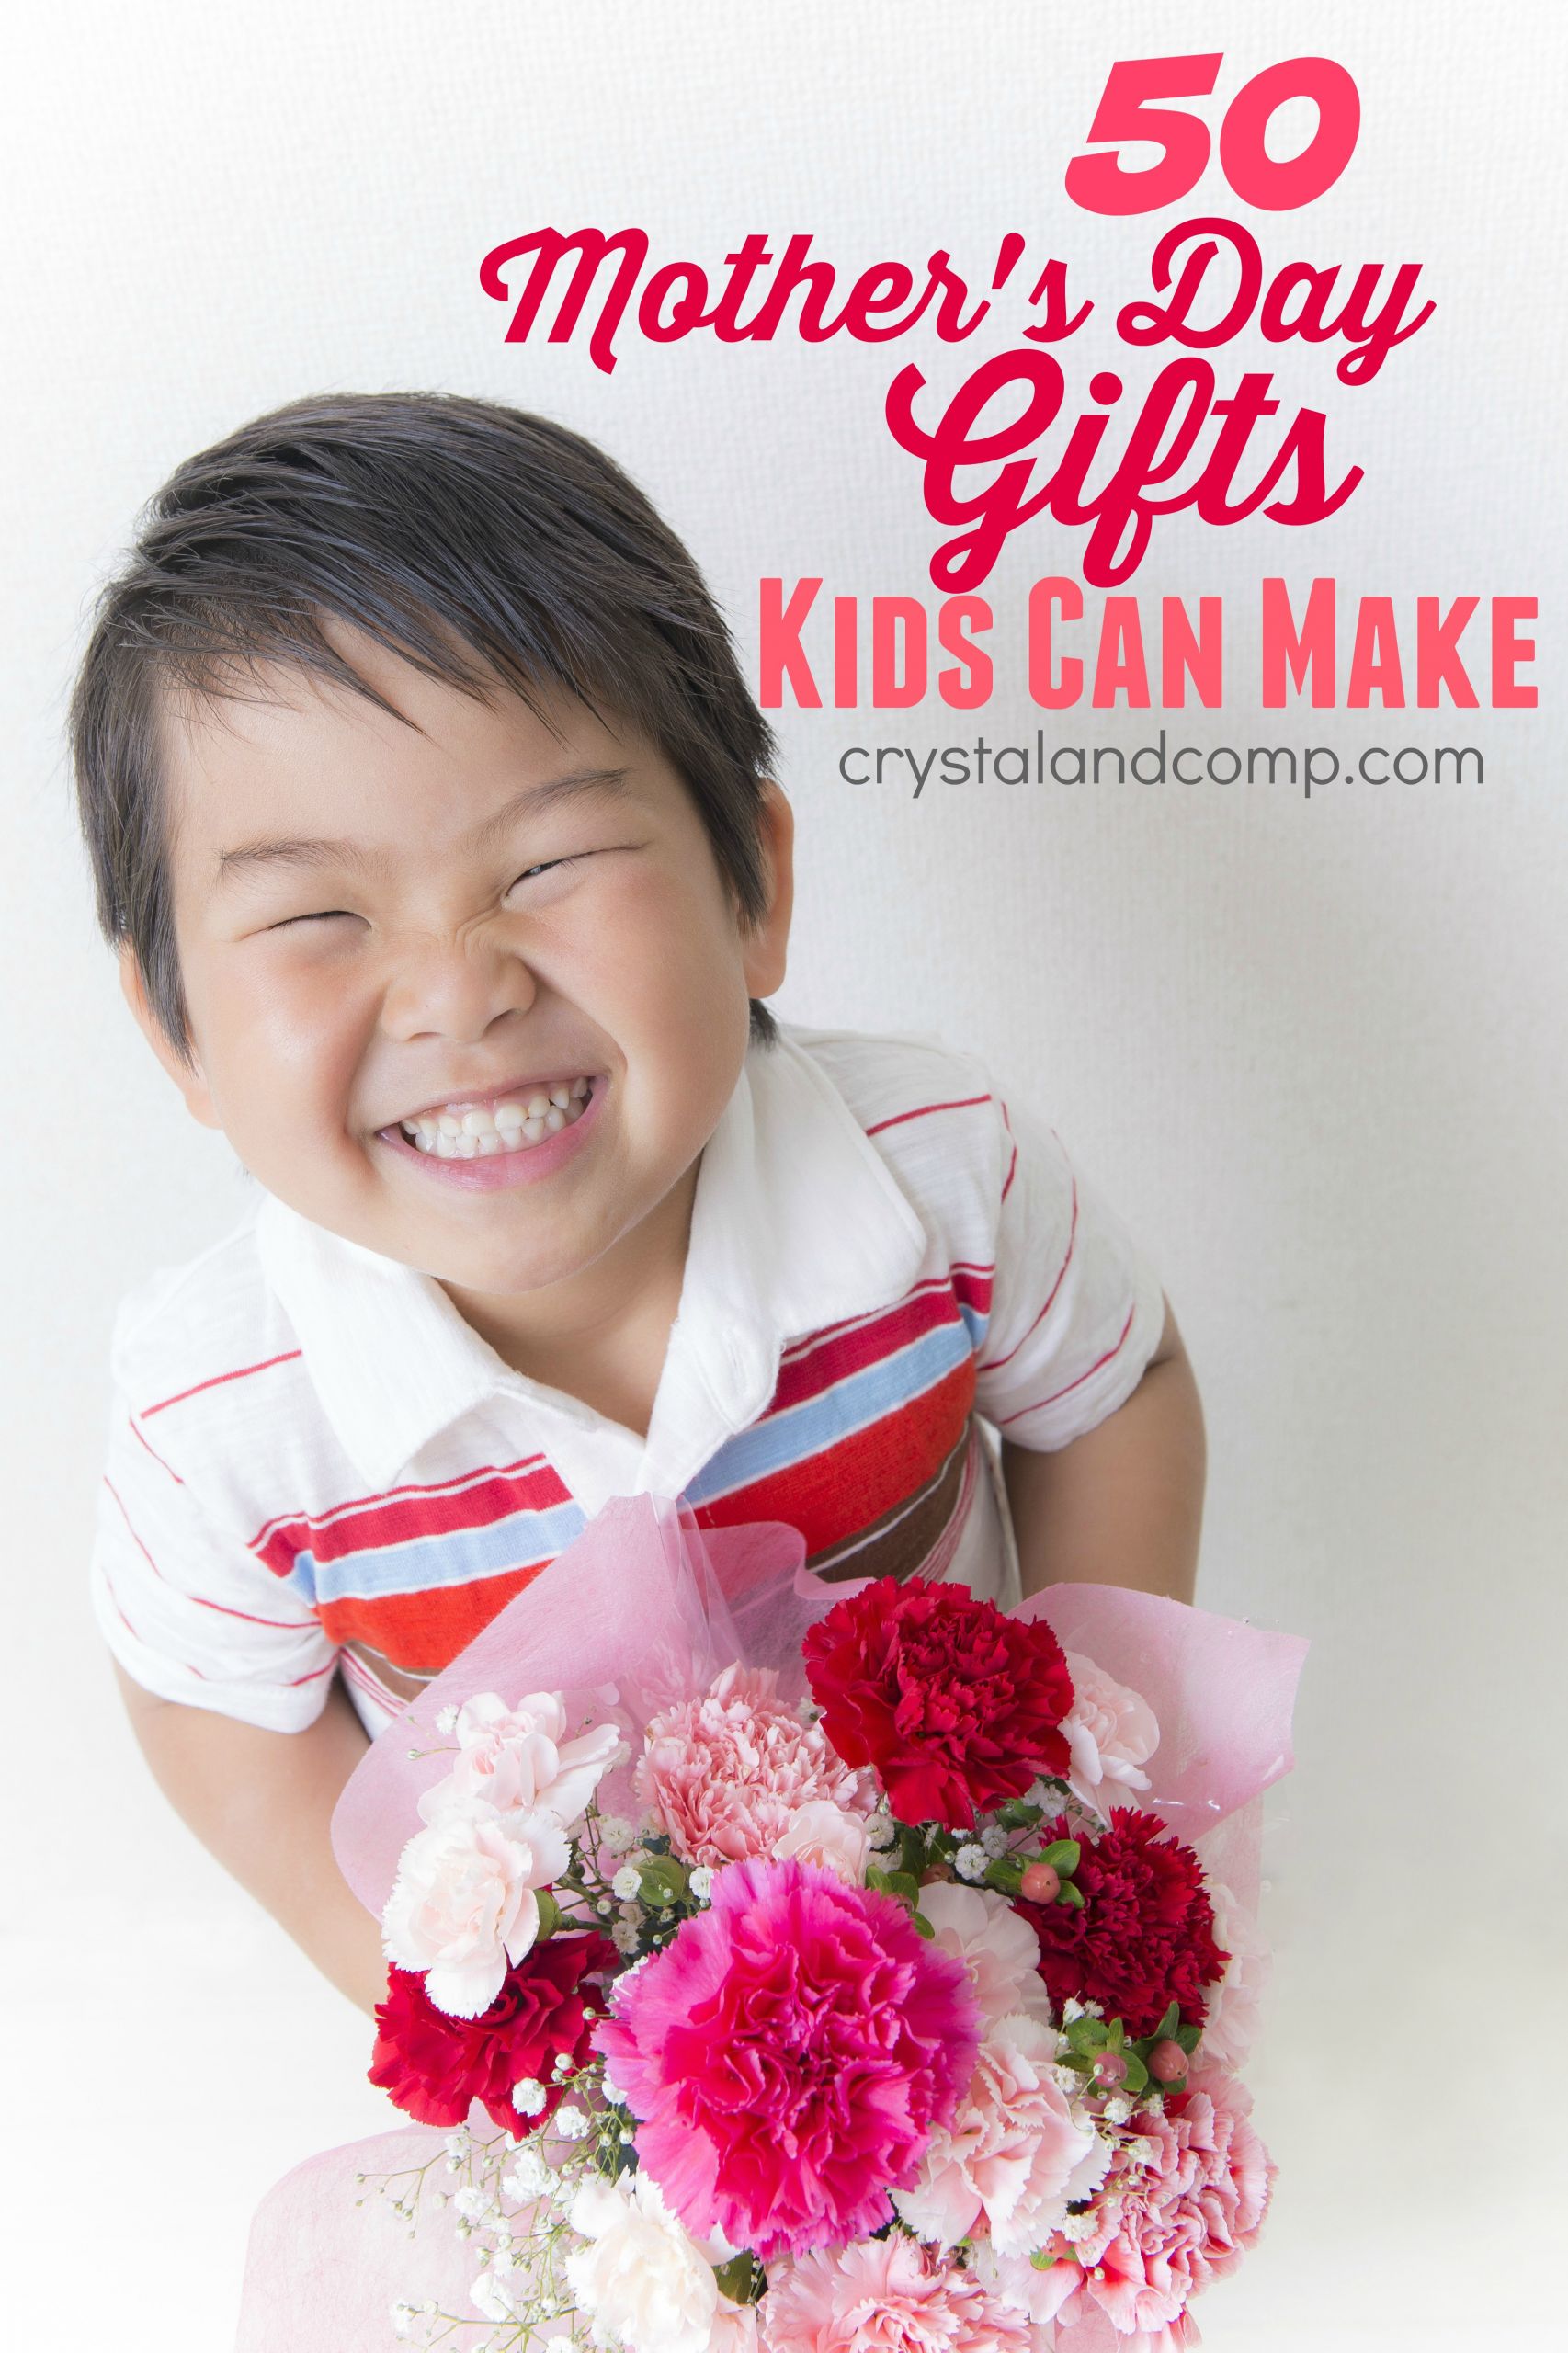 Mothers Day Gifts Kids Can Make
 50 Mother s Day Gift Ideas Kids Can Help Make